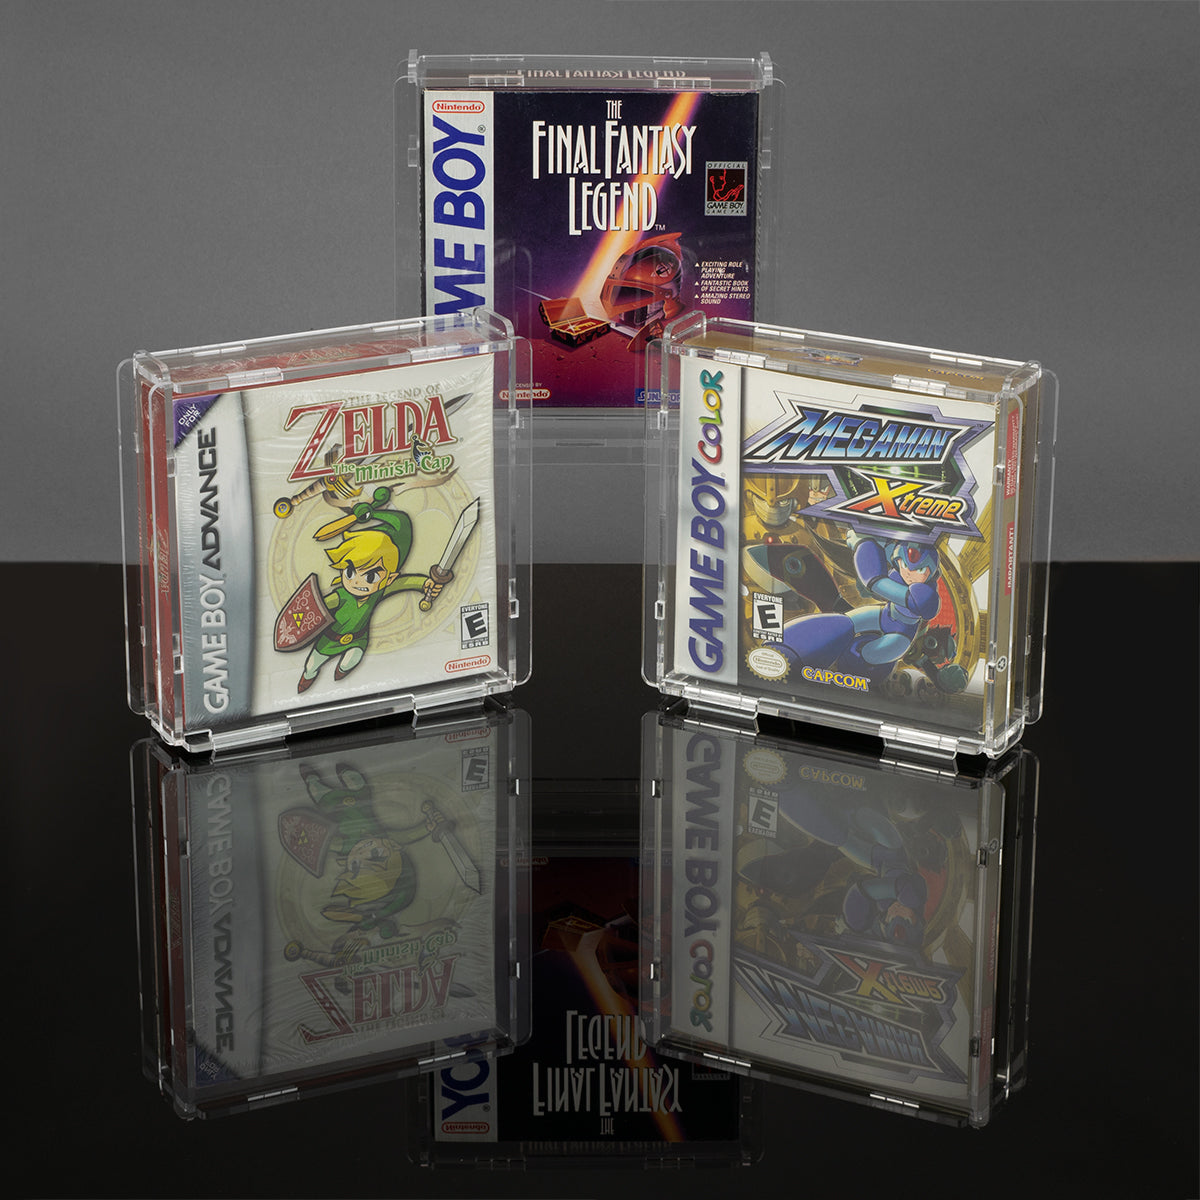 ds game cases with gba slot